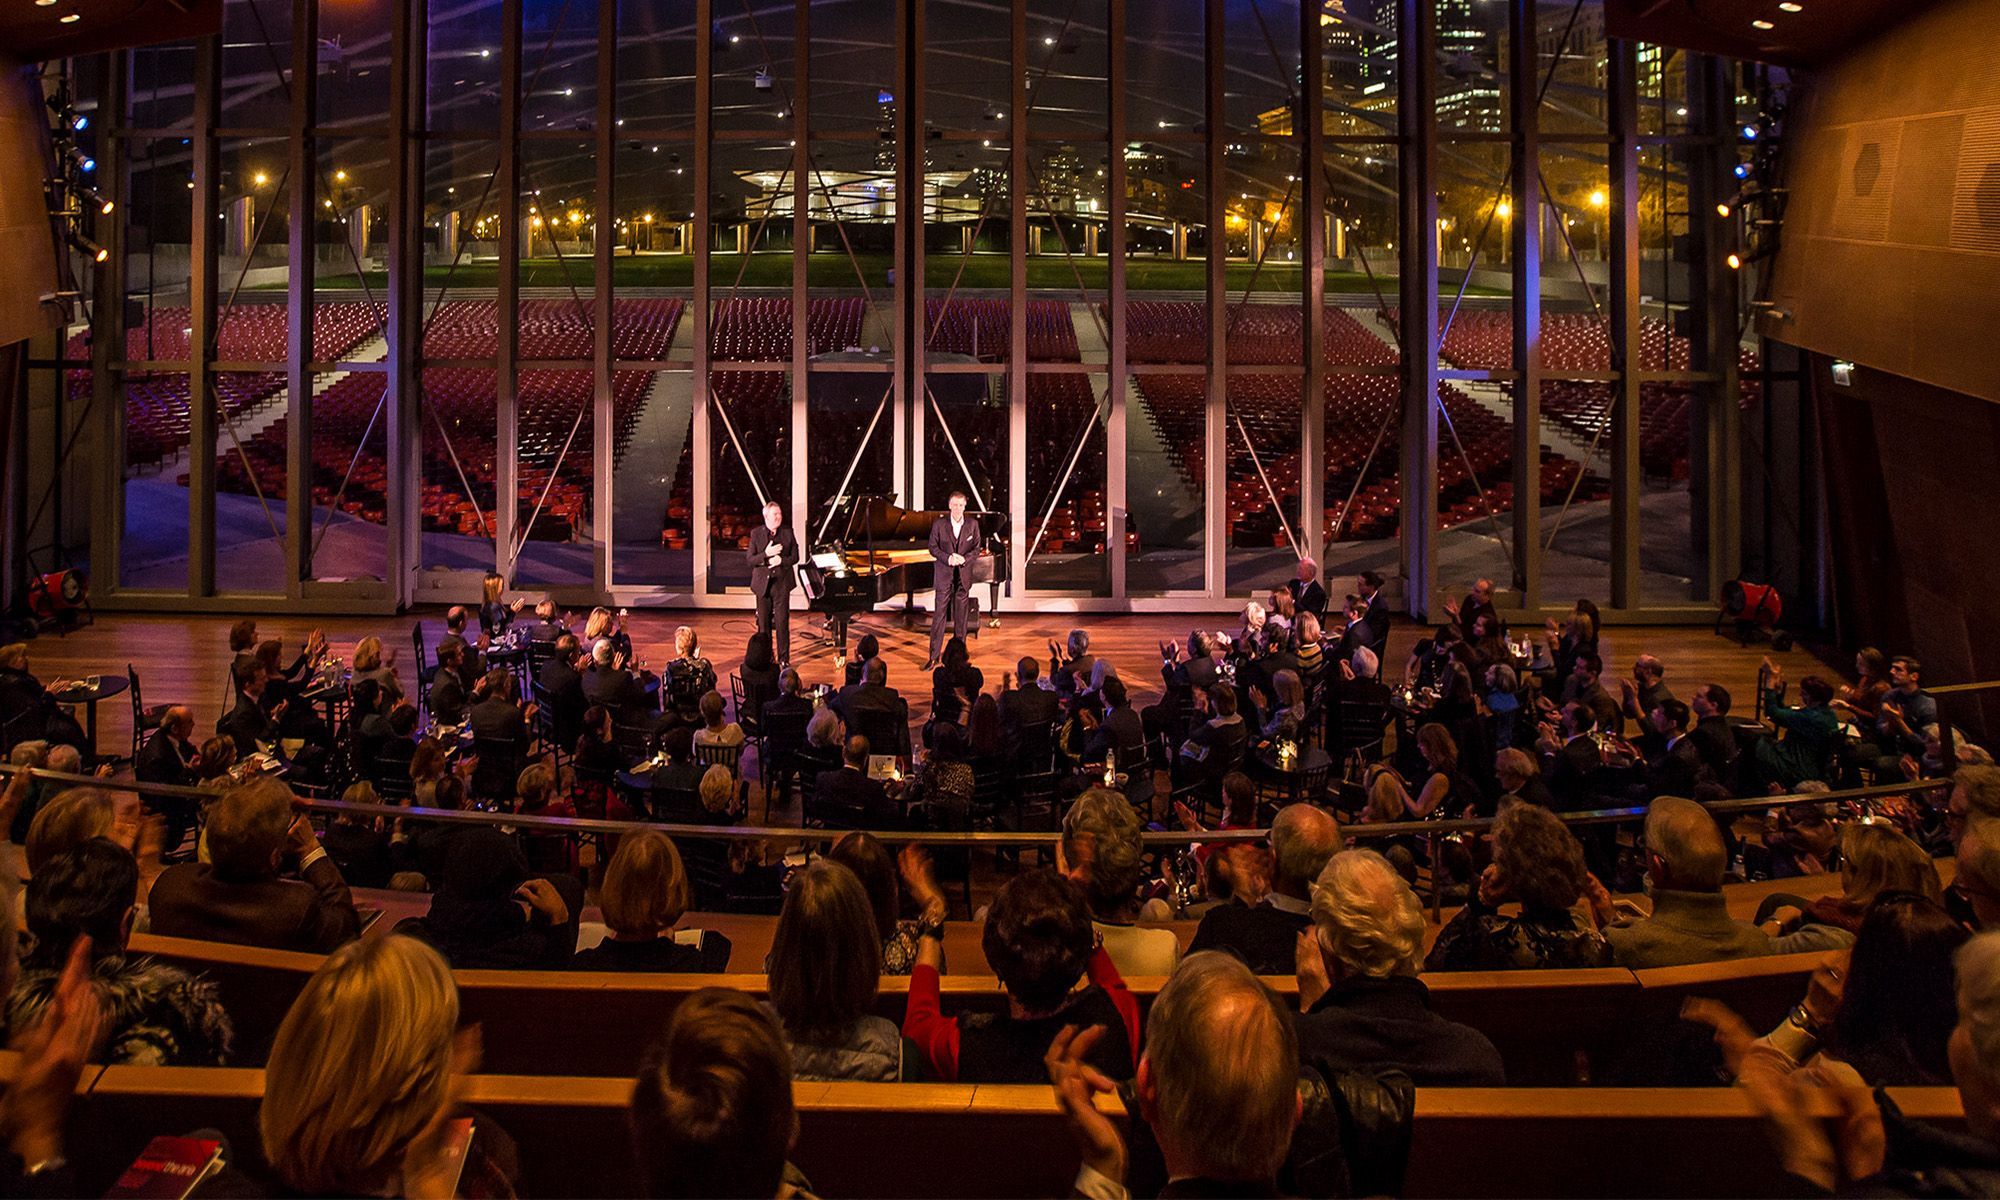 Arial view of an audience looking at the stage where the glass wall behind the performers displays the Chicago skyline at night